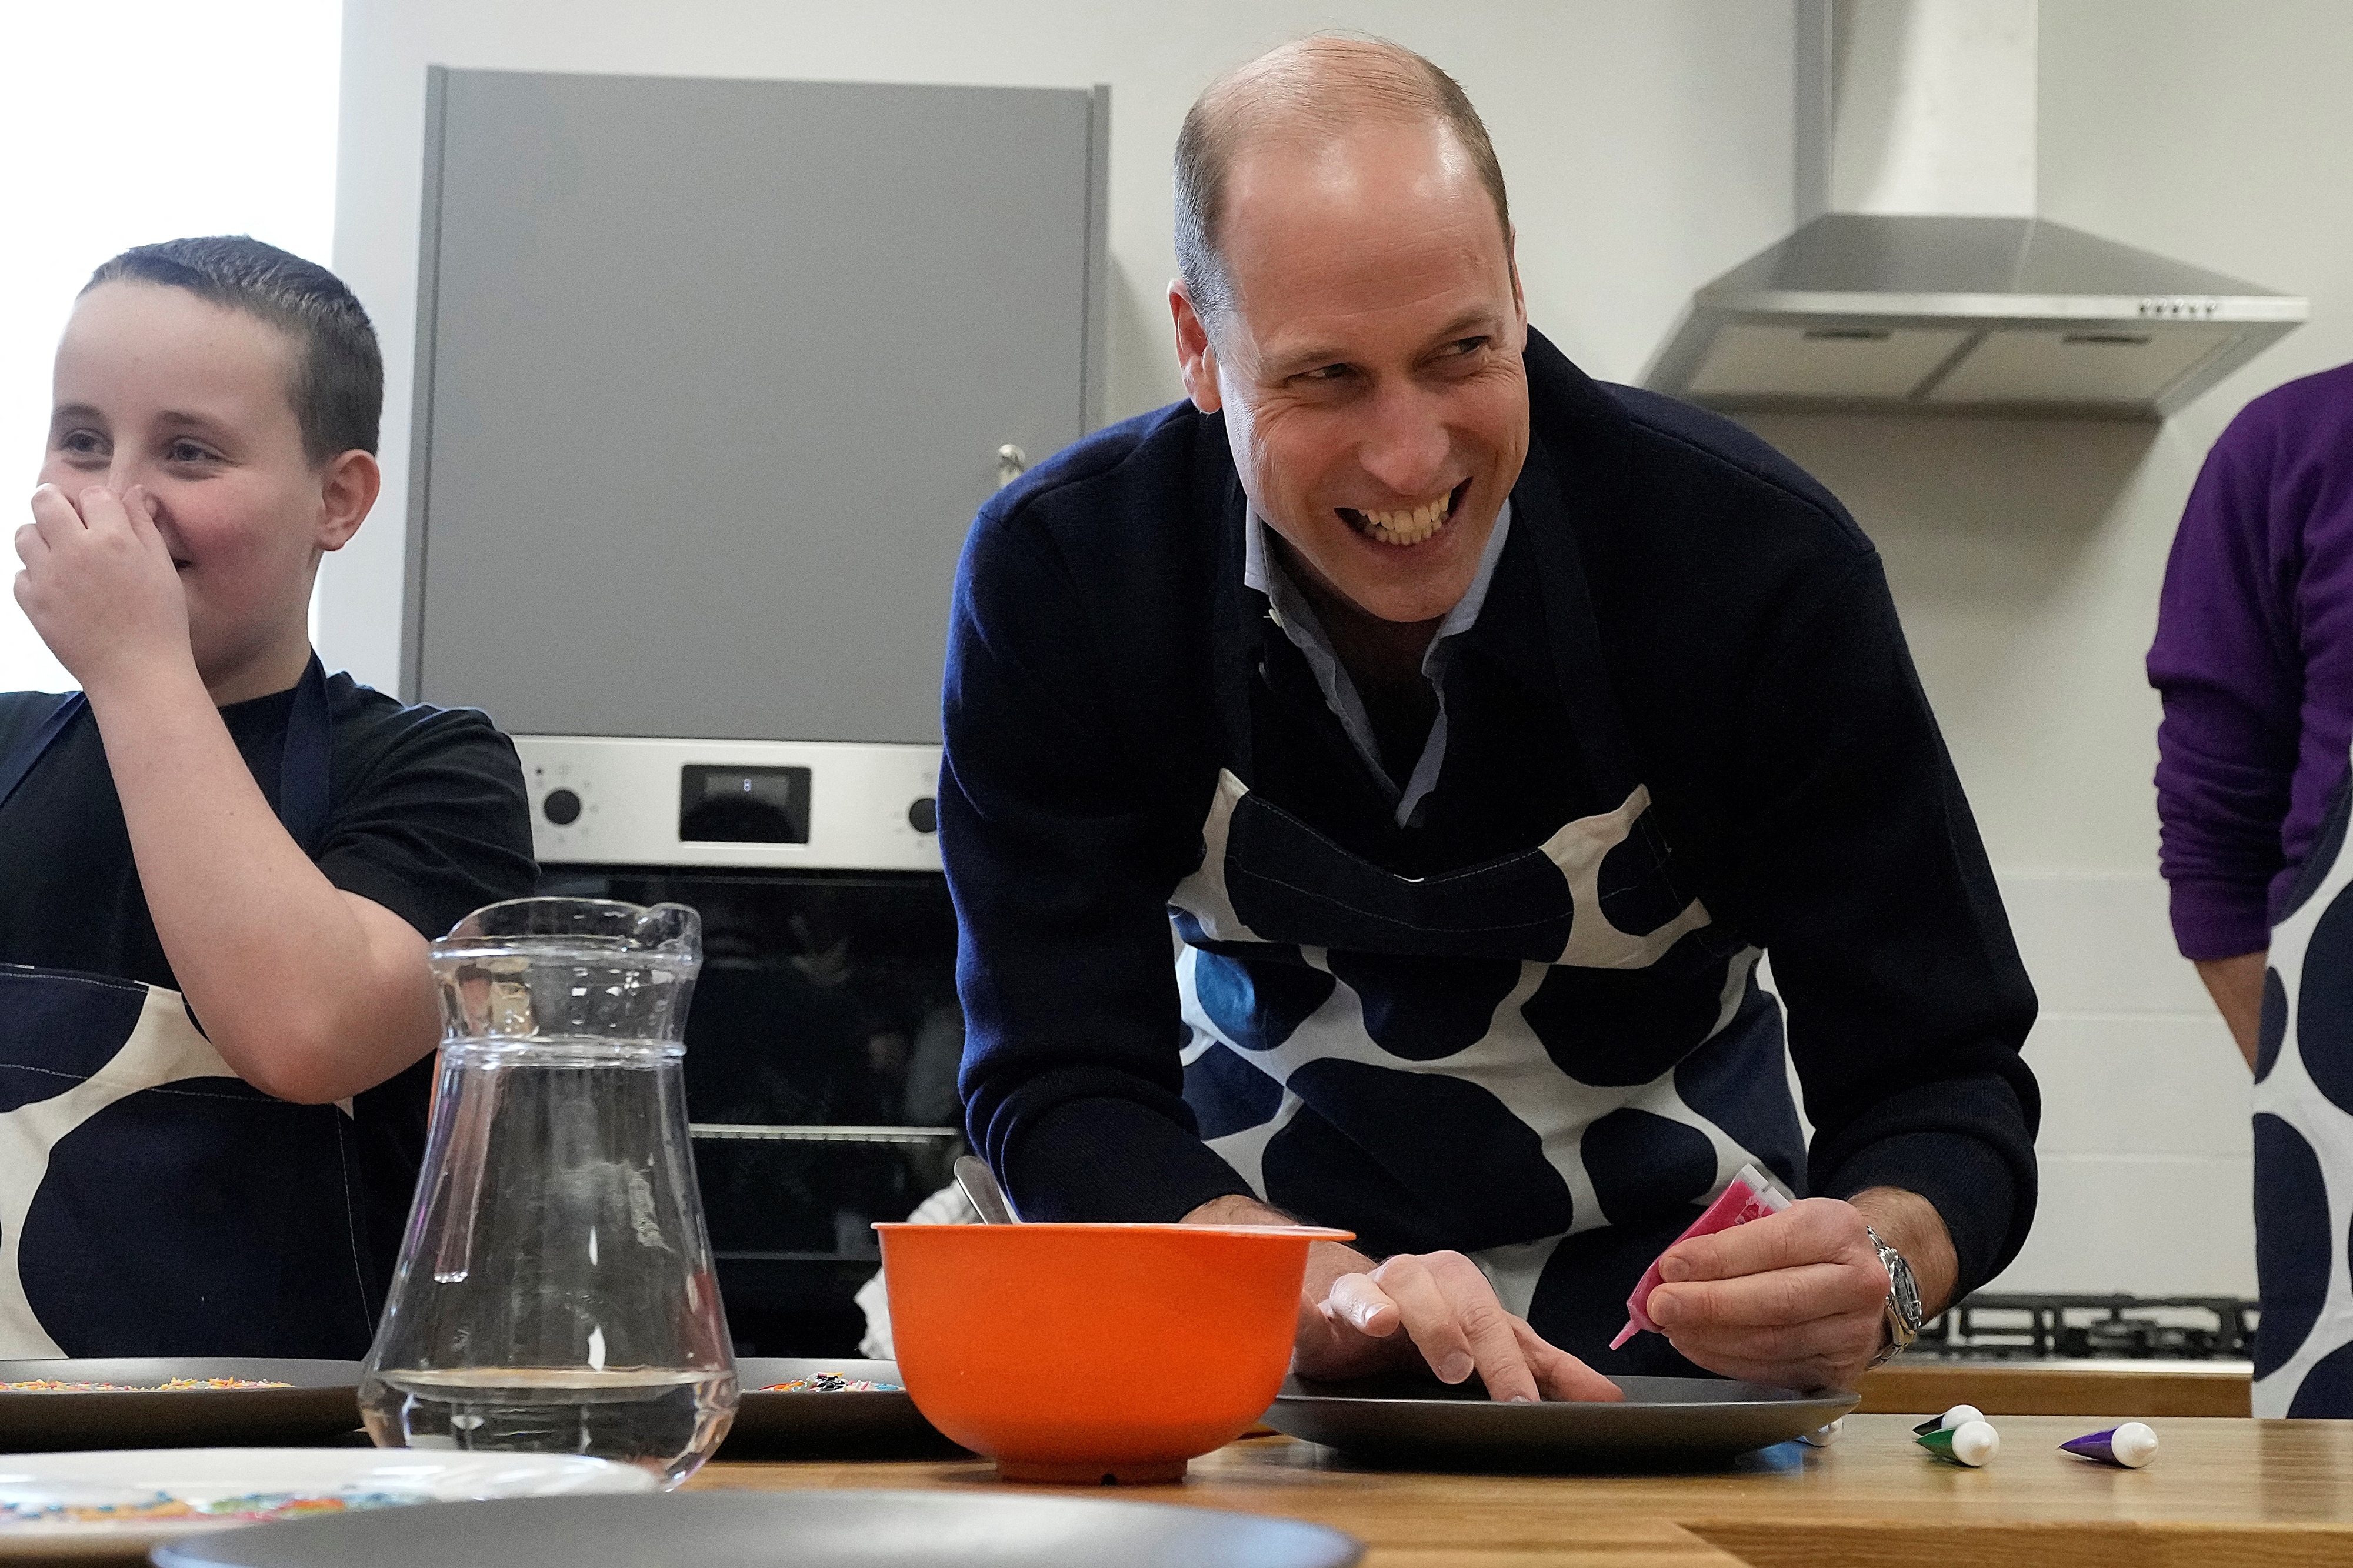 Prince William laughing with children during a cooking class